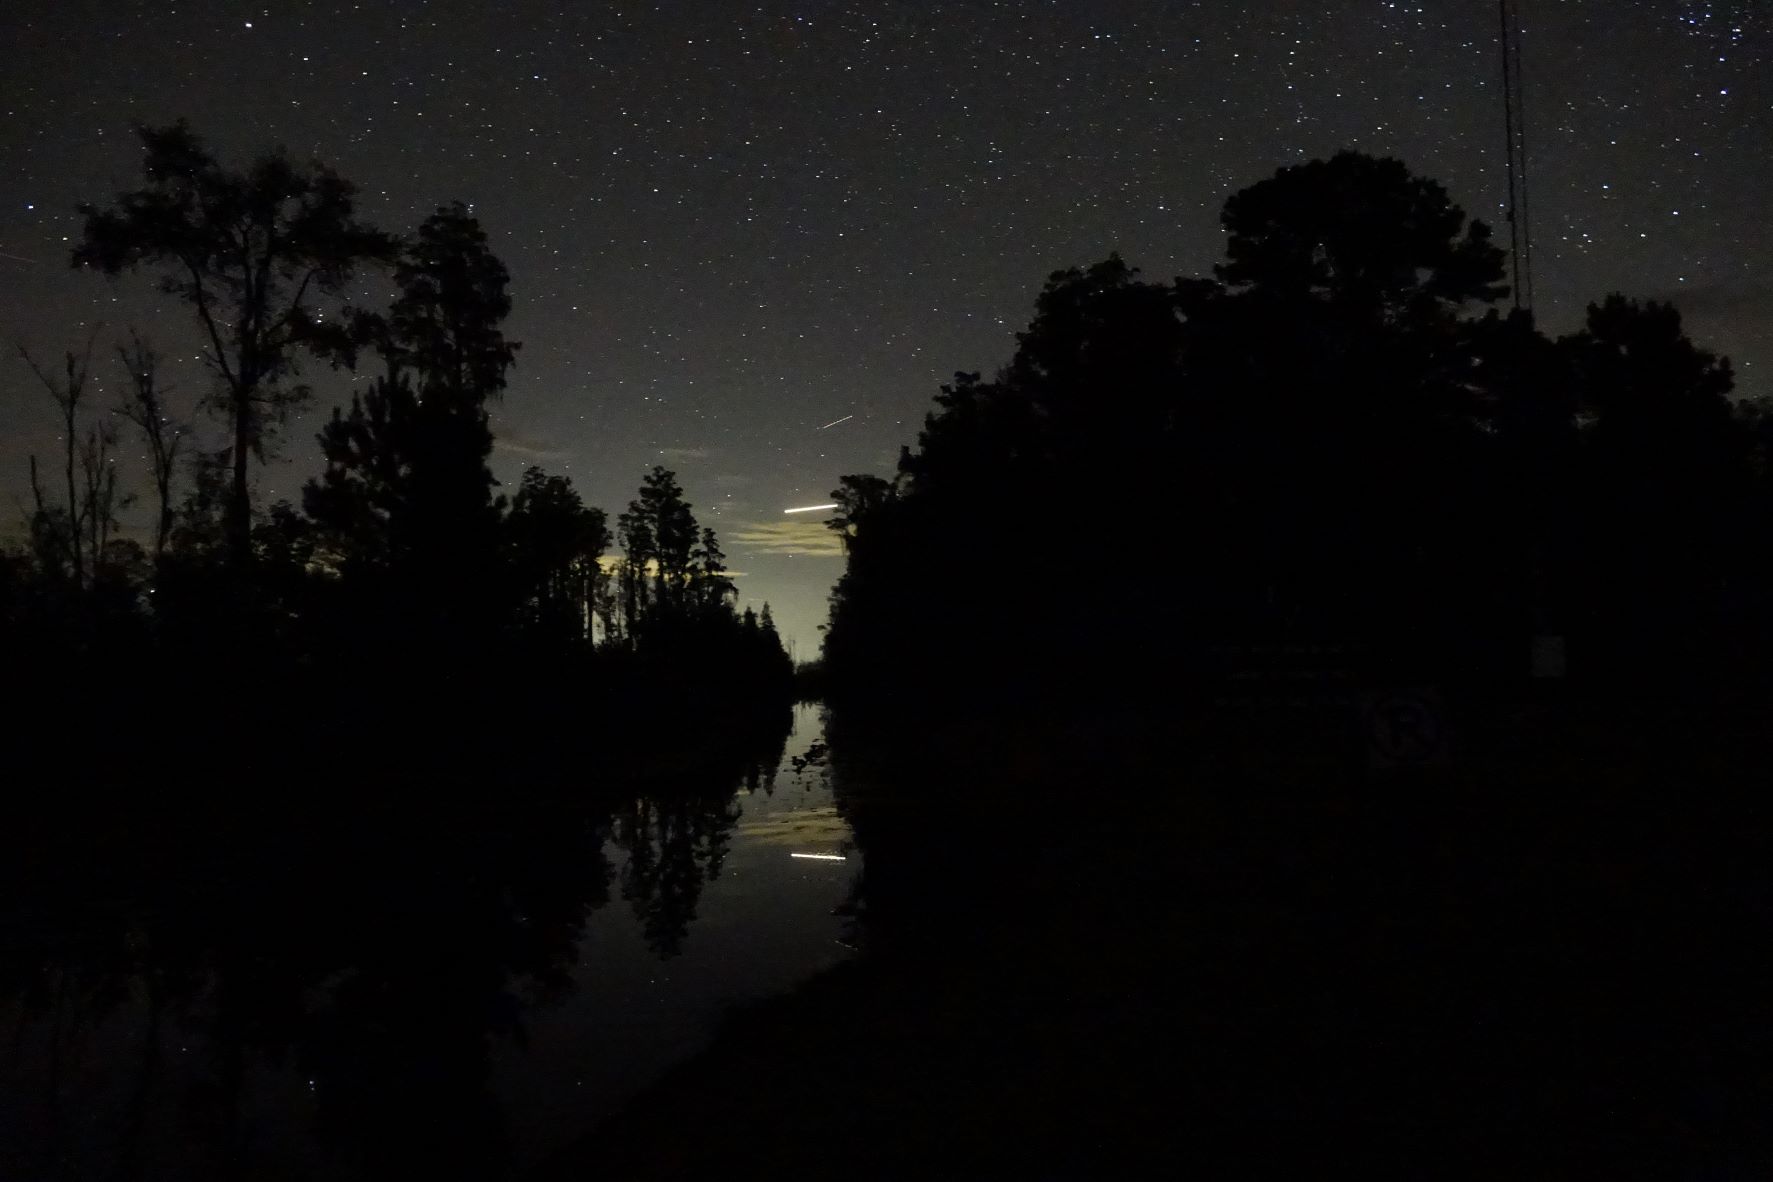 Night sky at Stephen Foster State Park